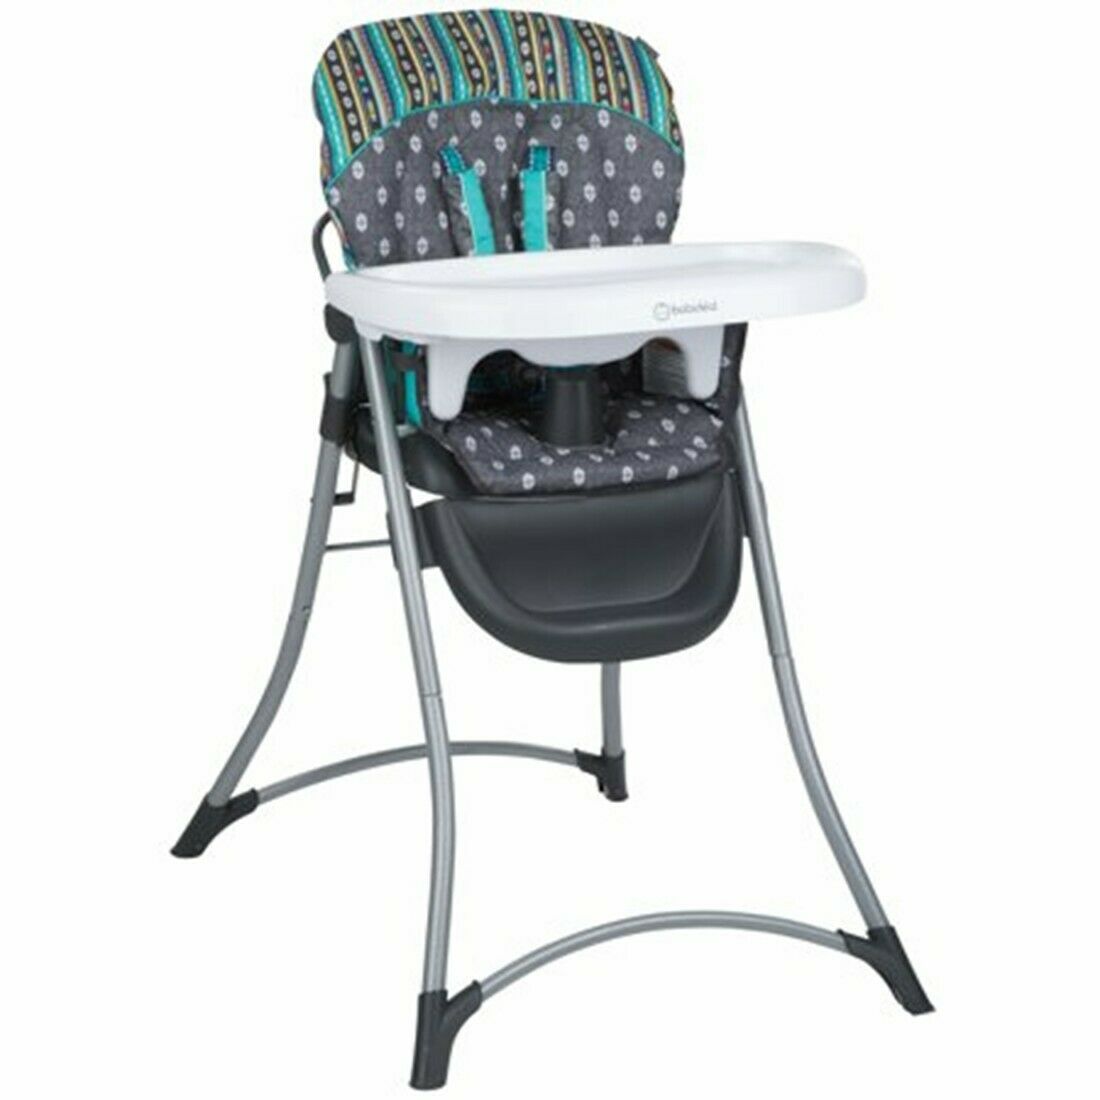 Newborn Baby Stroller with Car Seat Playard Diaper Bag Infant Swing Chair Combo